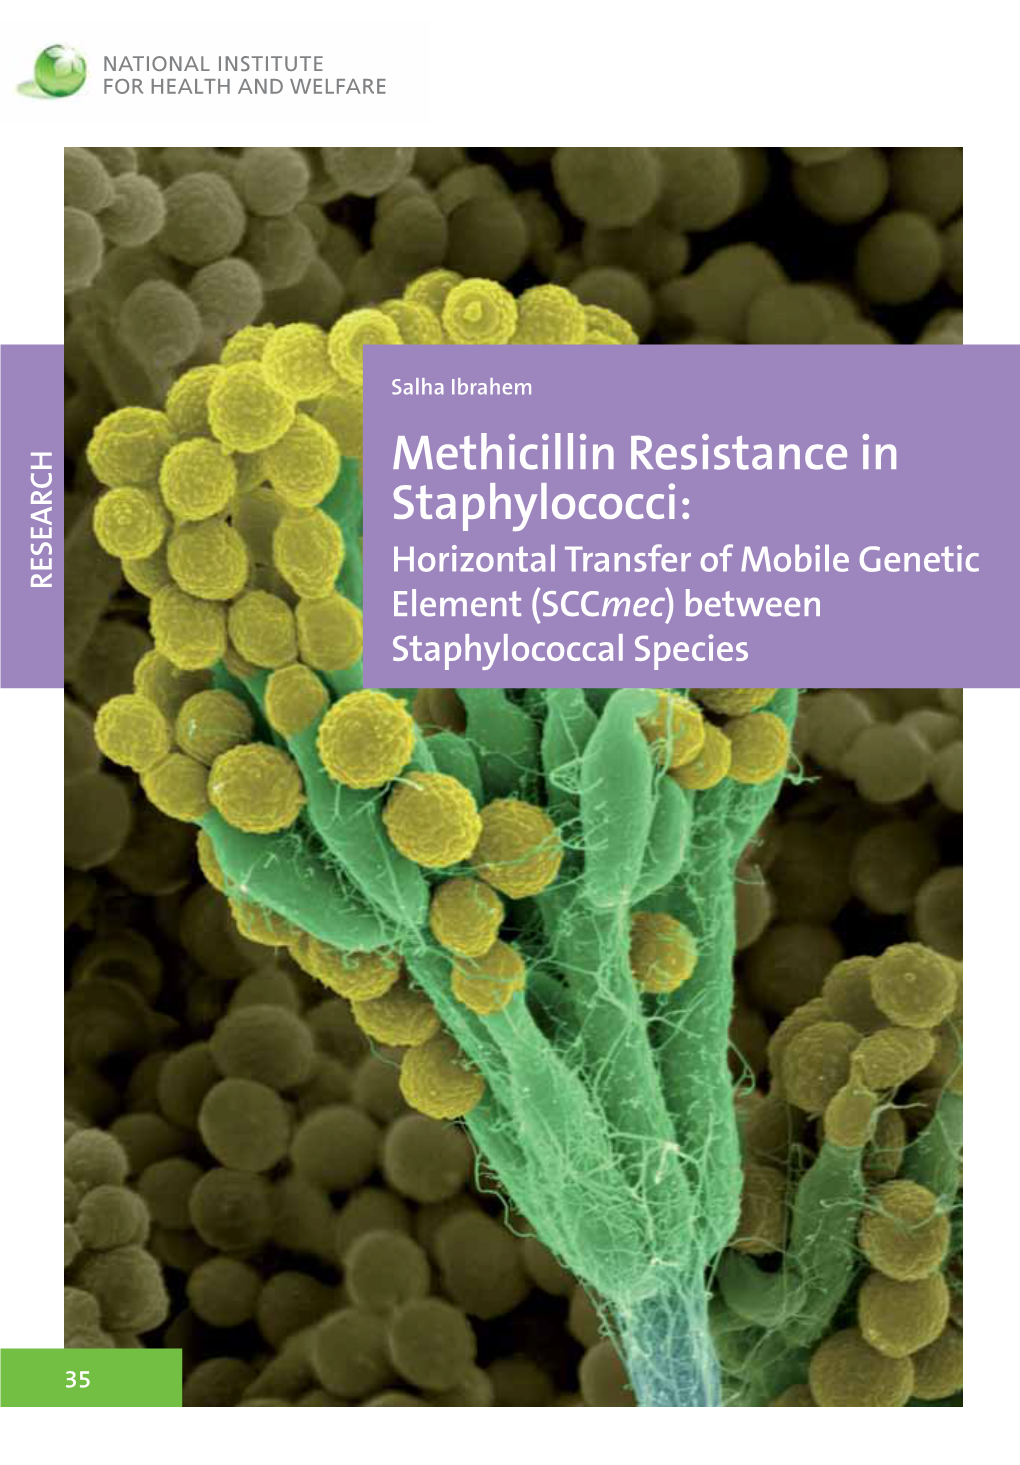 Methicillin Resistance in Staphylococci